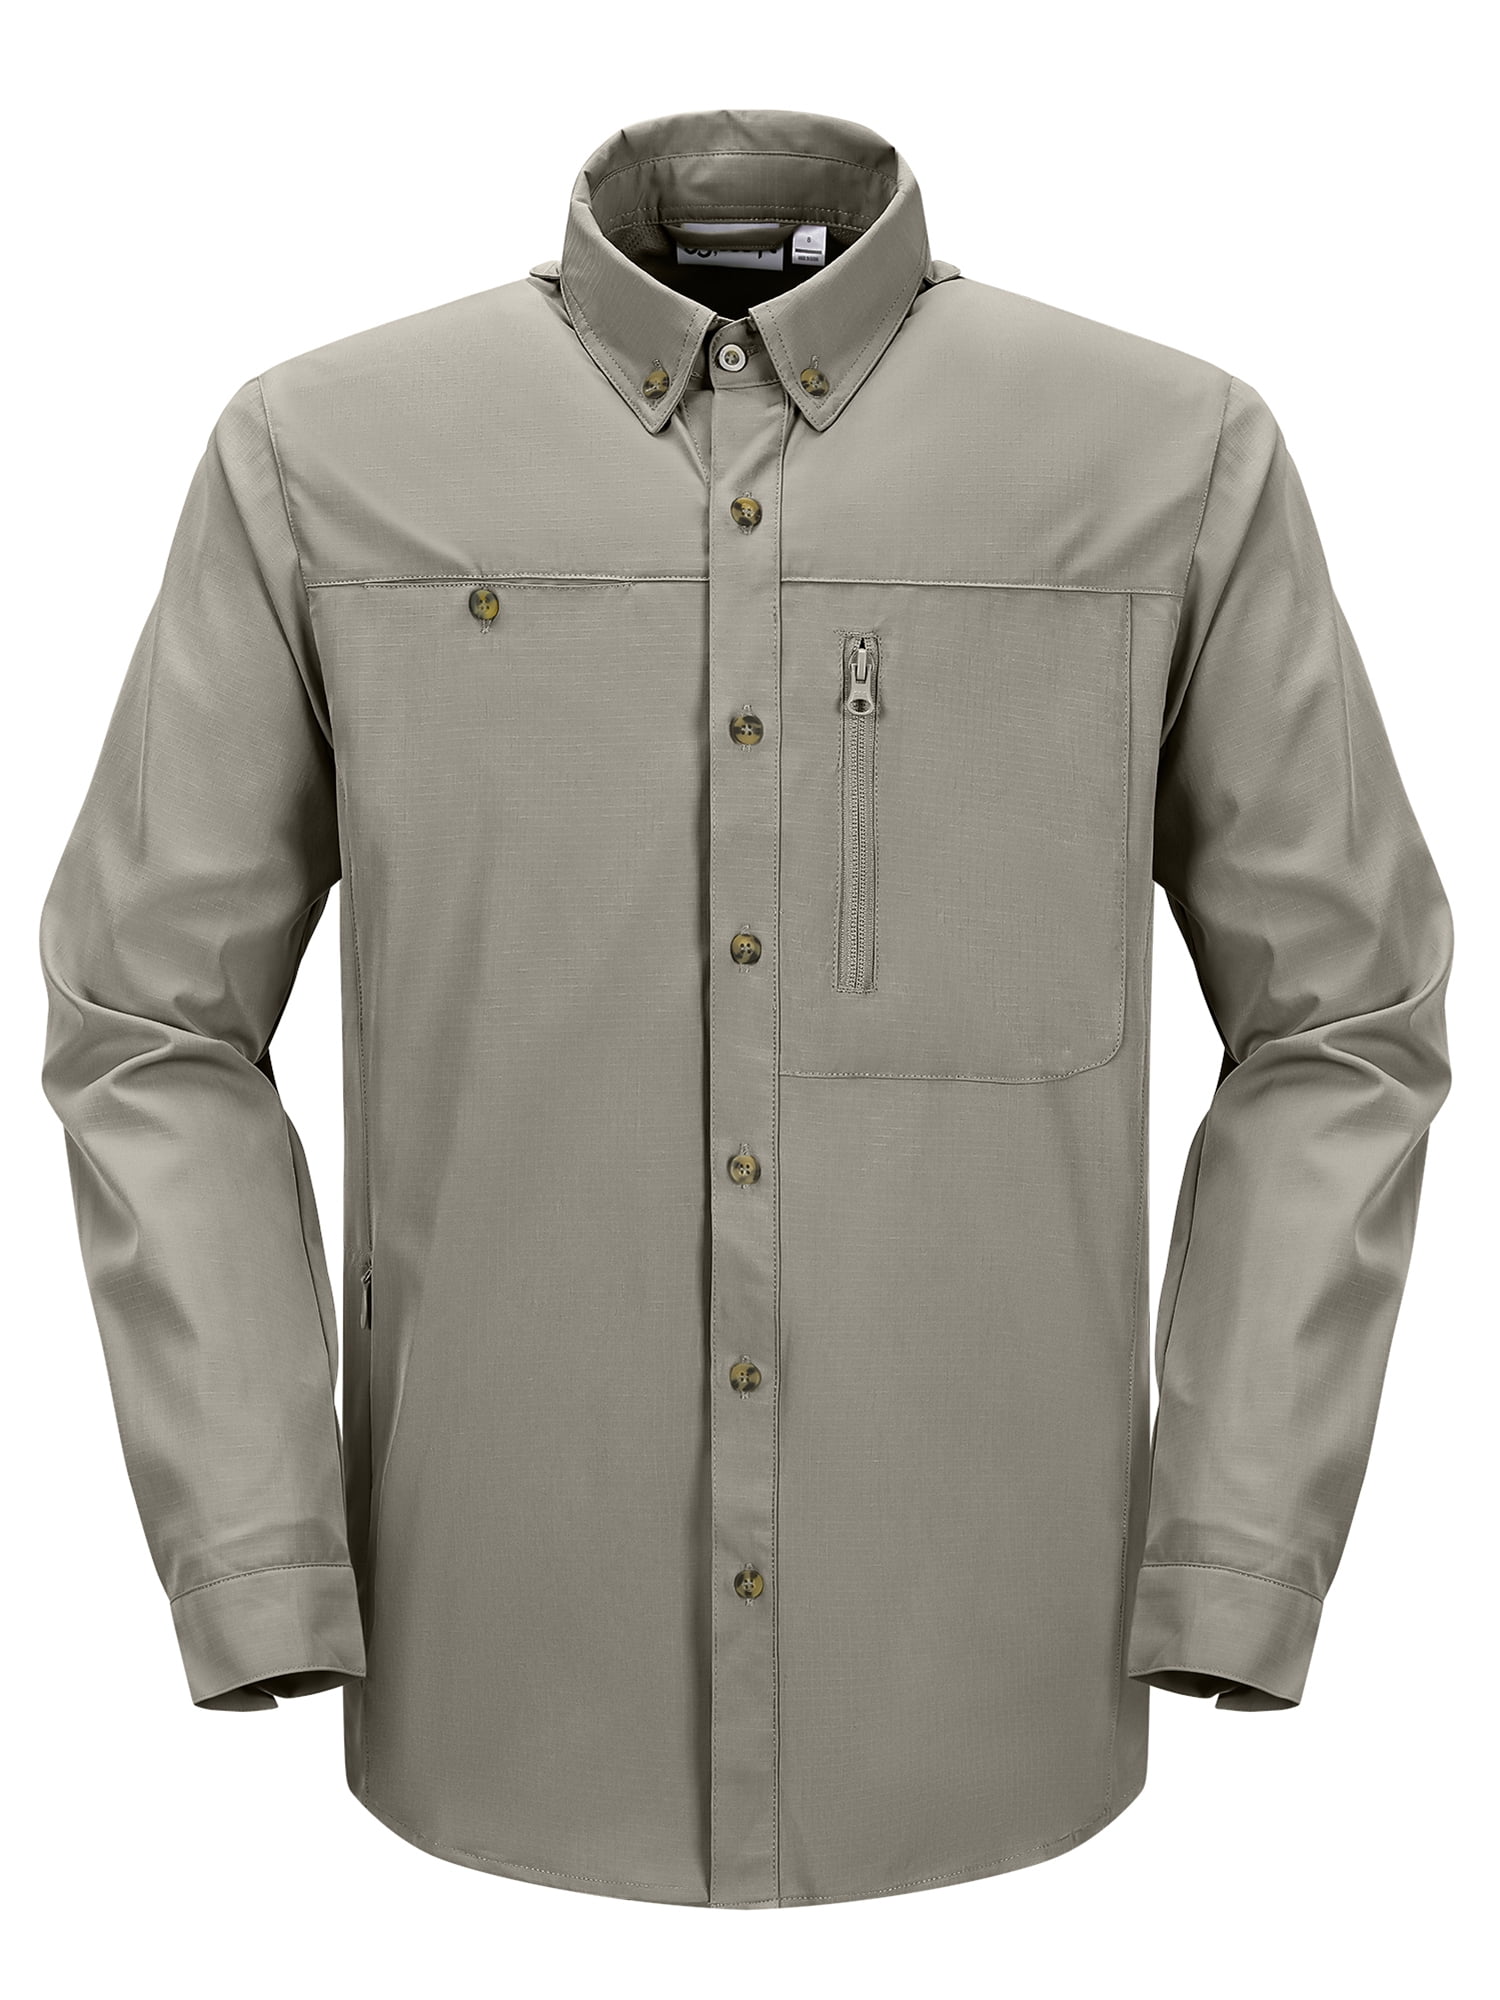 Wrangler Men's Outdoor Long Sleeve Shirt with UPF 30+ Protection